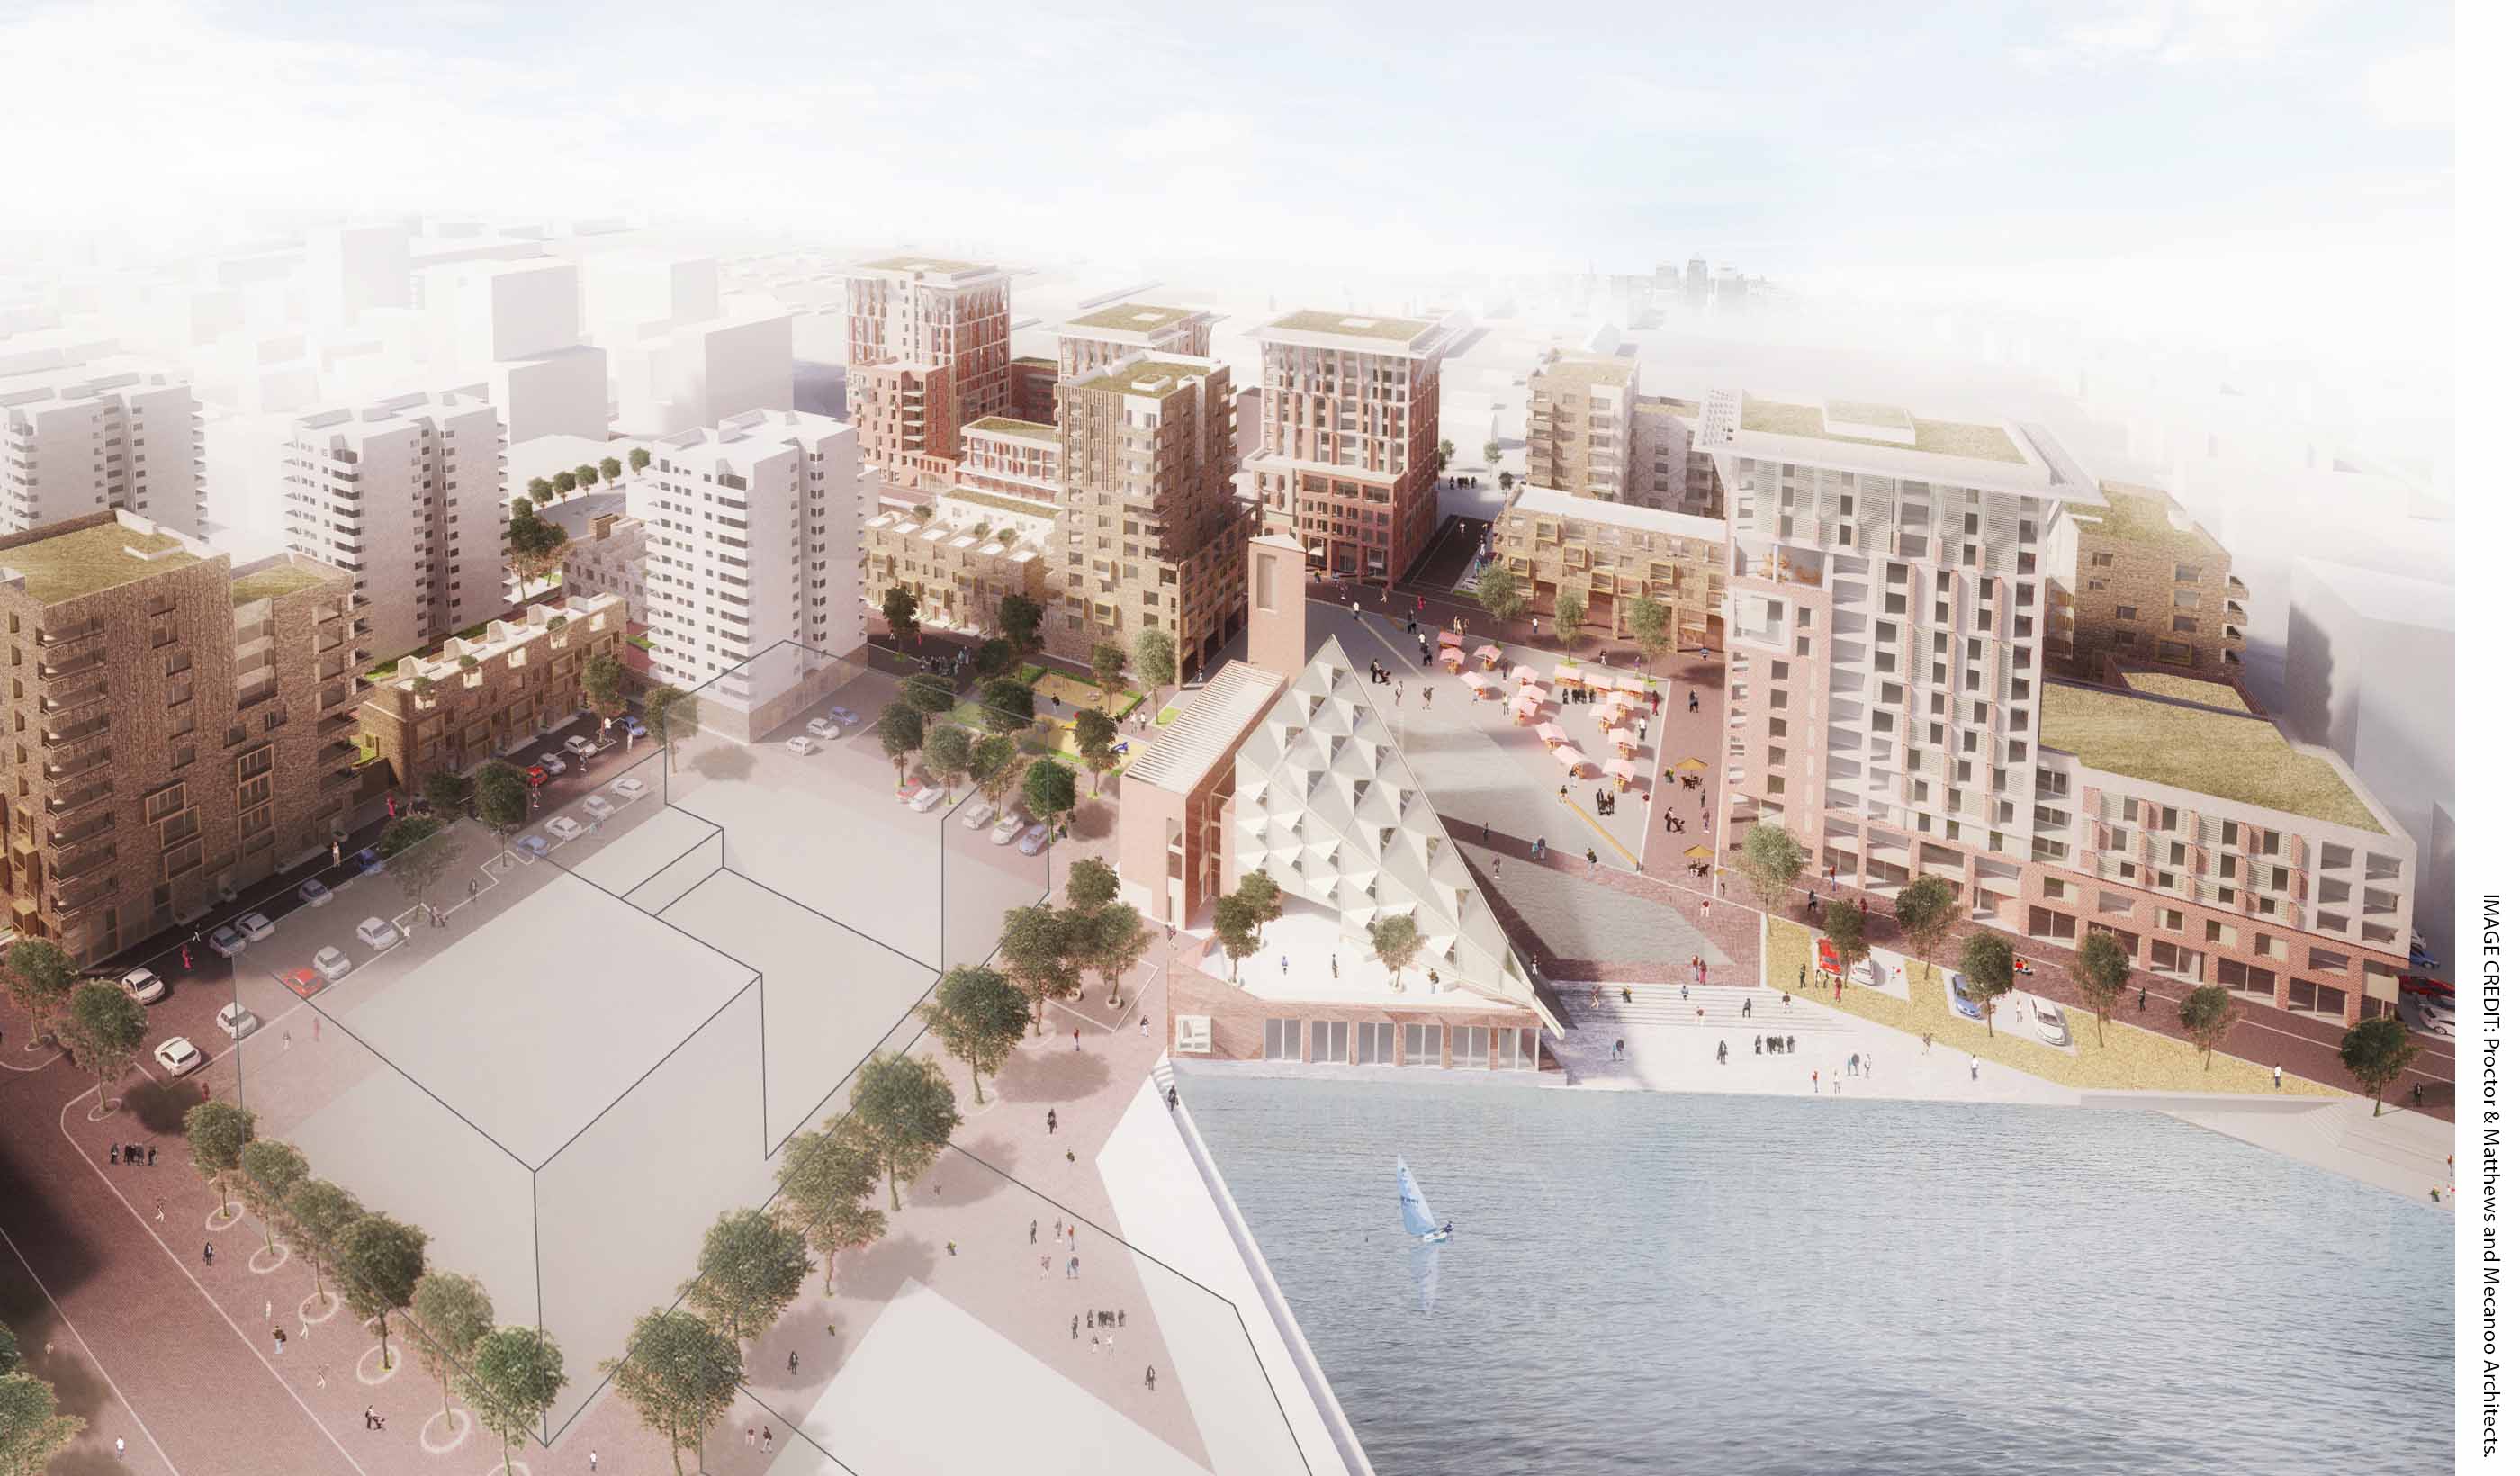 Abbey Wood and South Thamesmead Masterplan